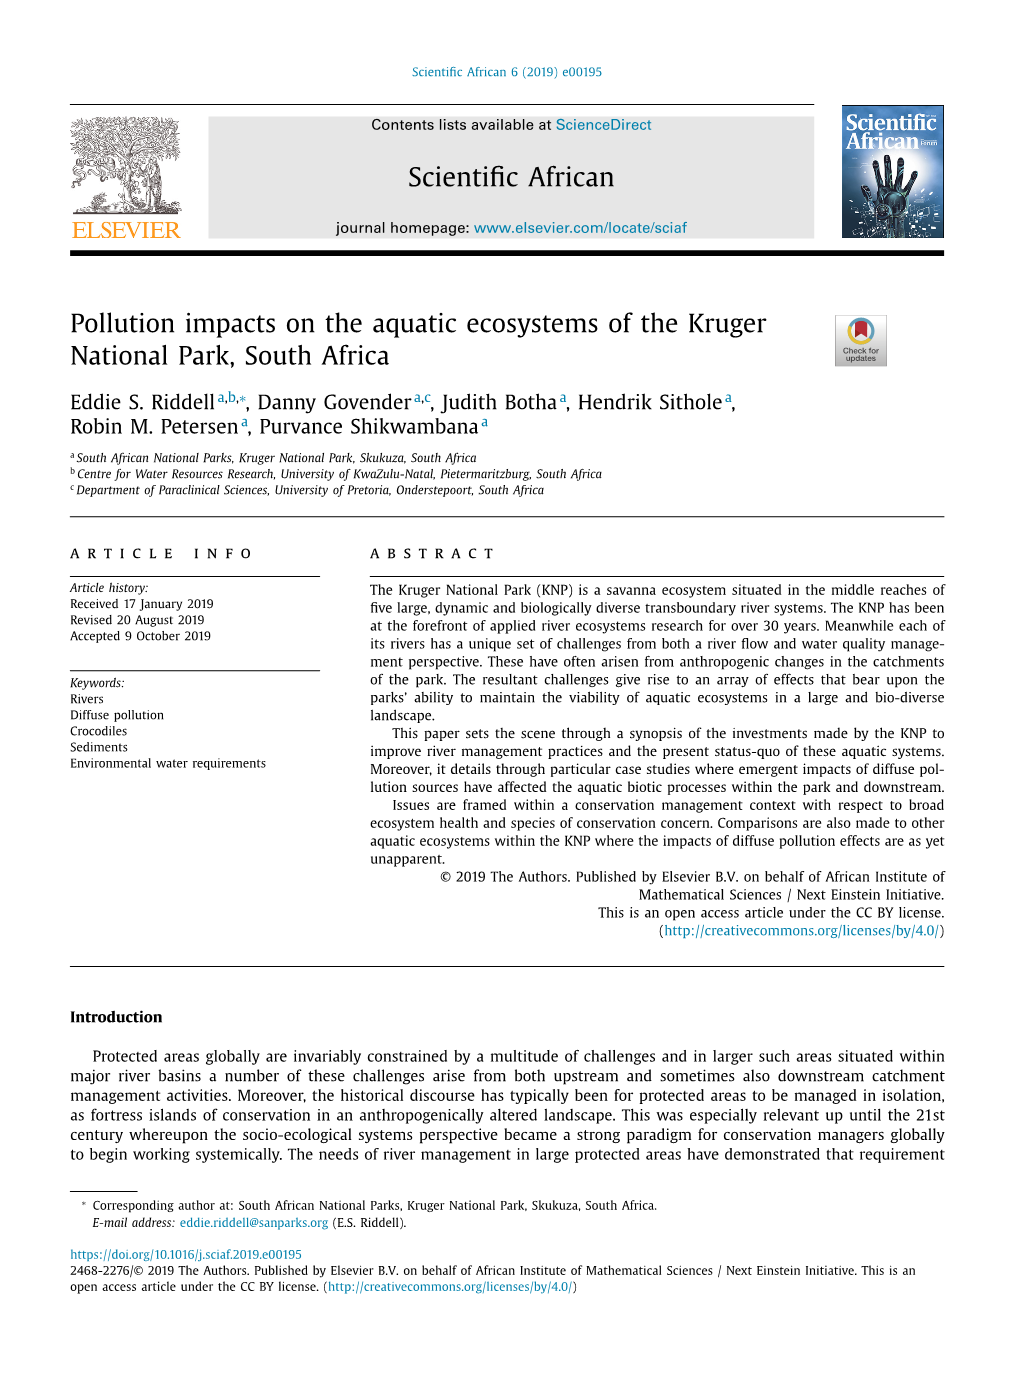 Pollution Impacts on the Aquatic Ecosystems of the Kruger National Park, South Africa